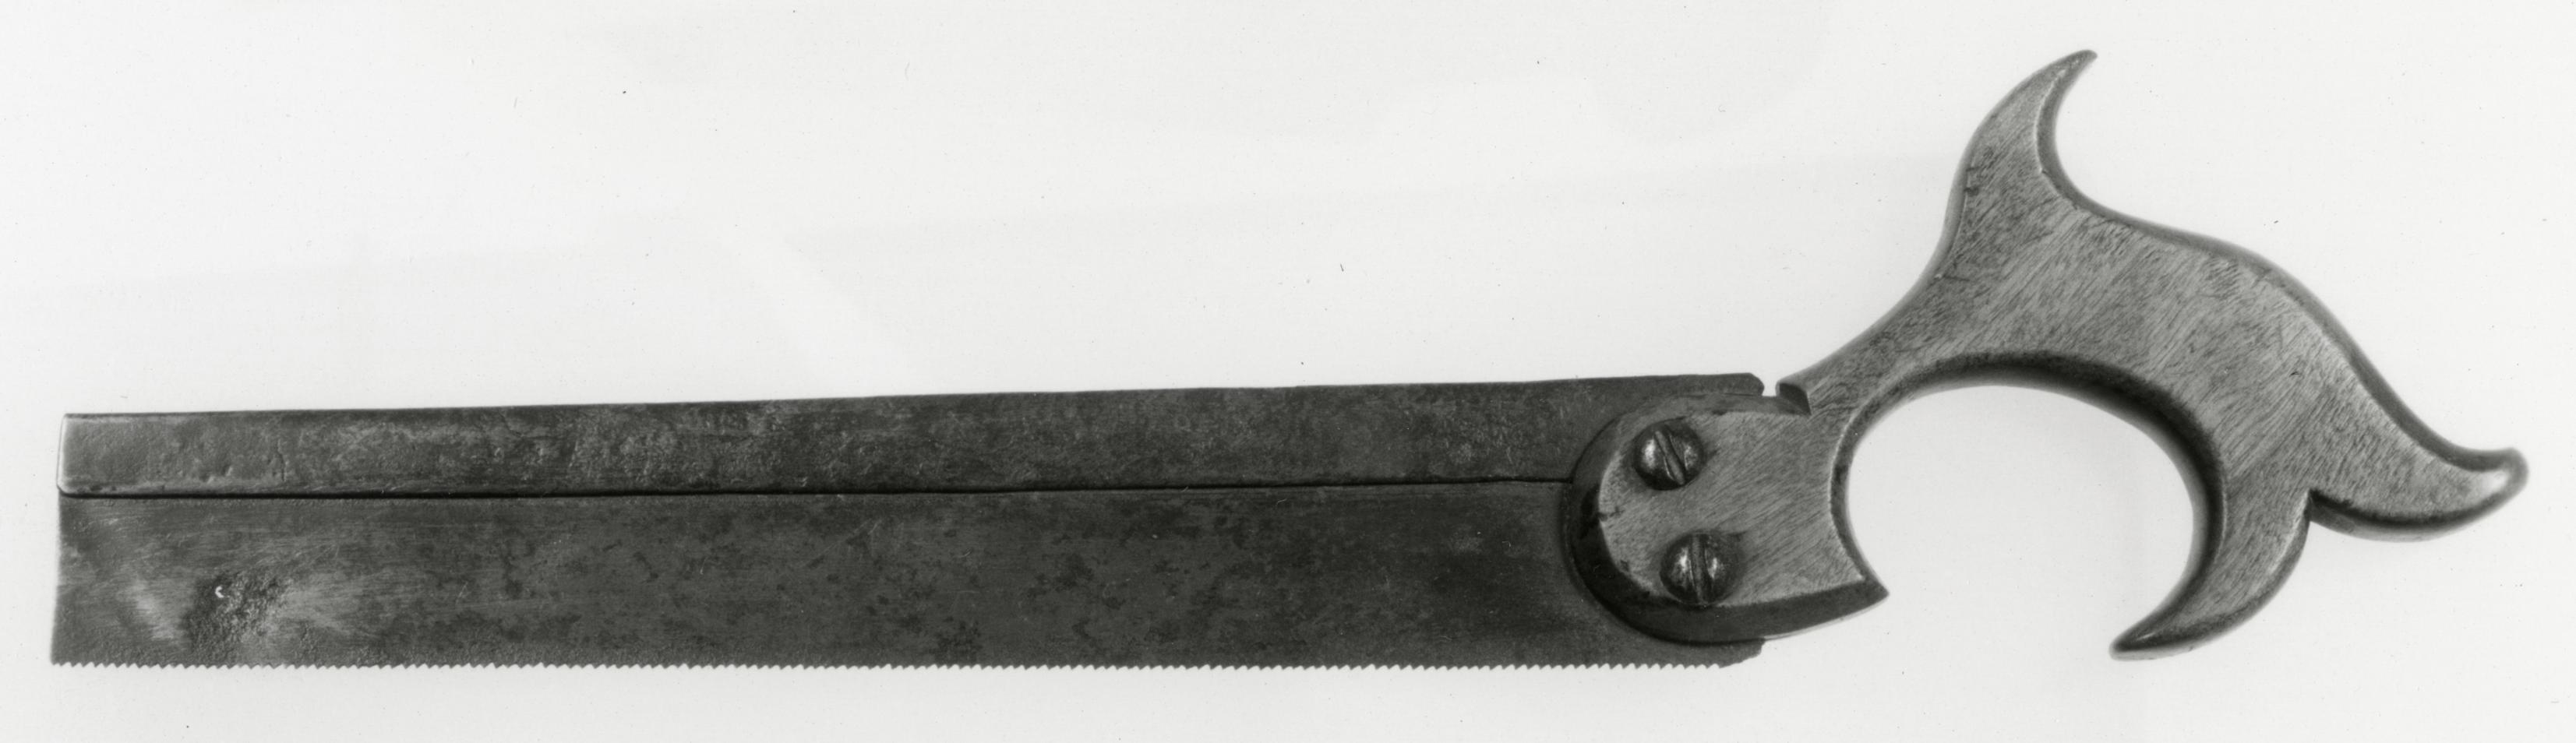 Black and white photograph of a dovetail saw.